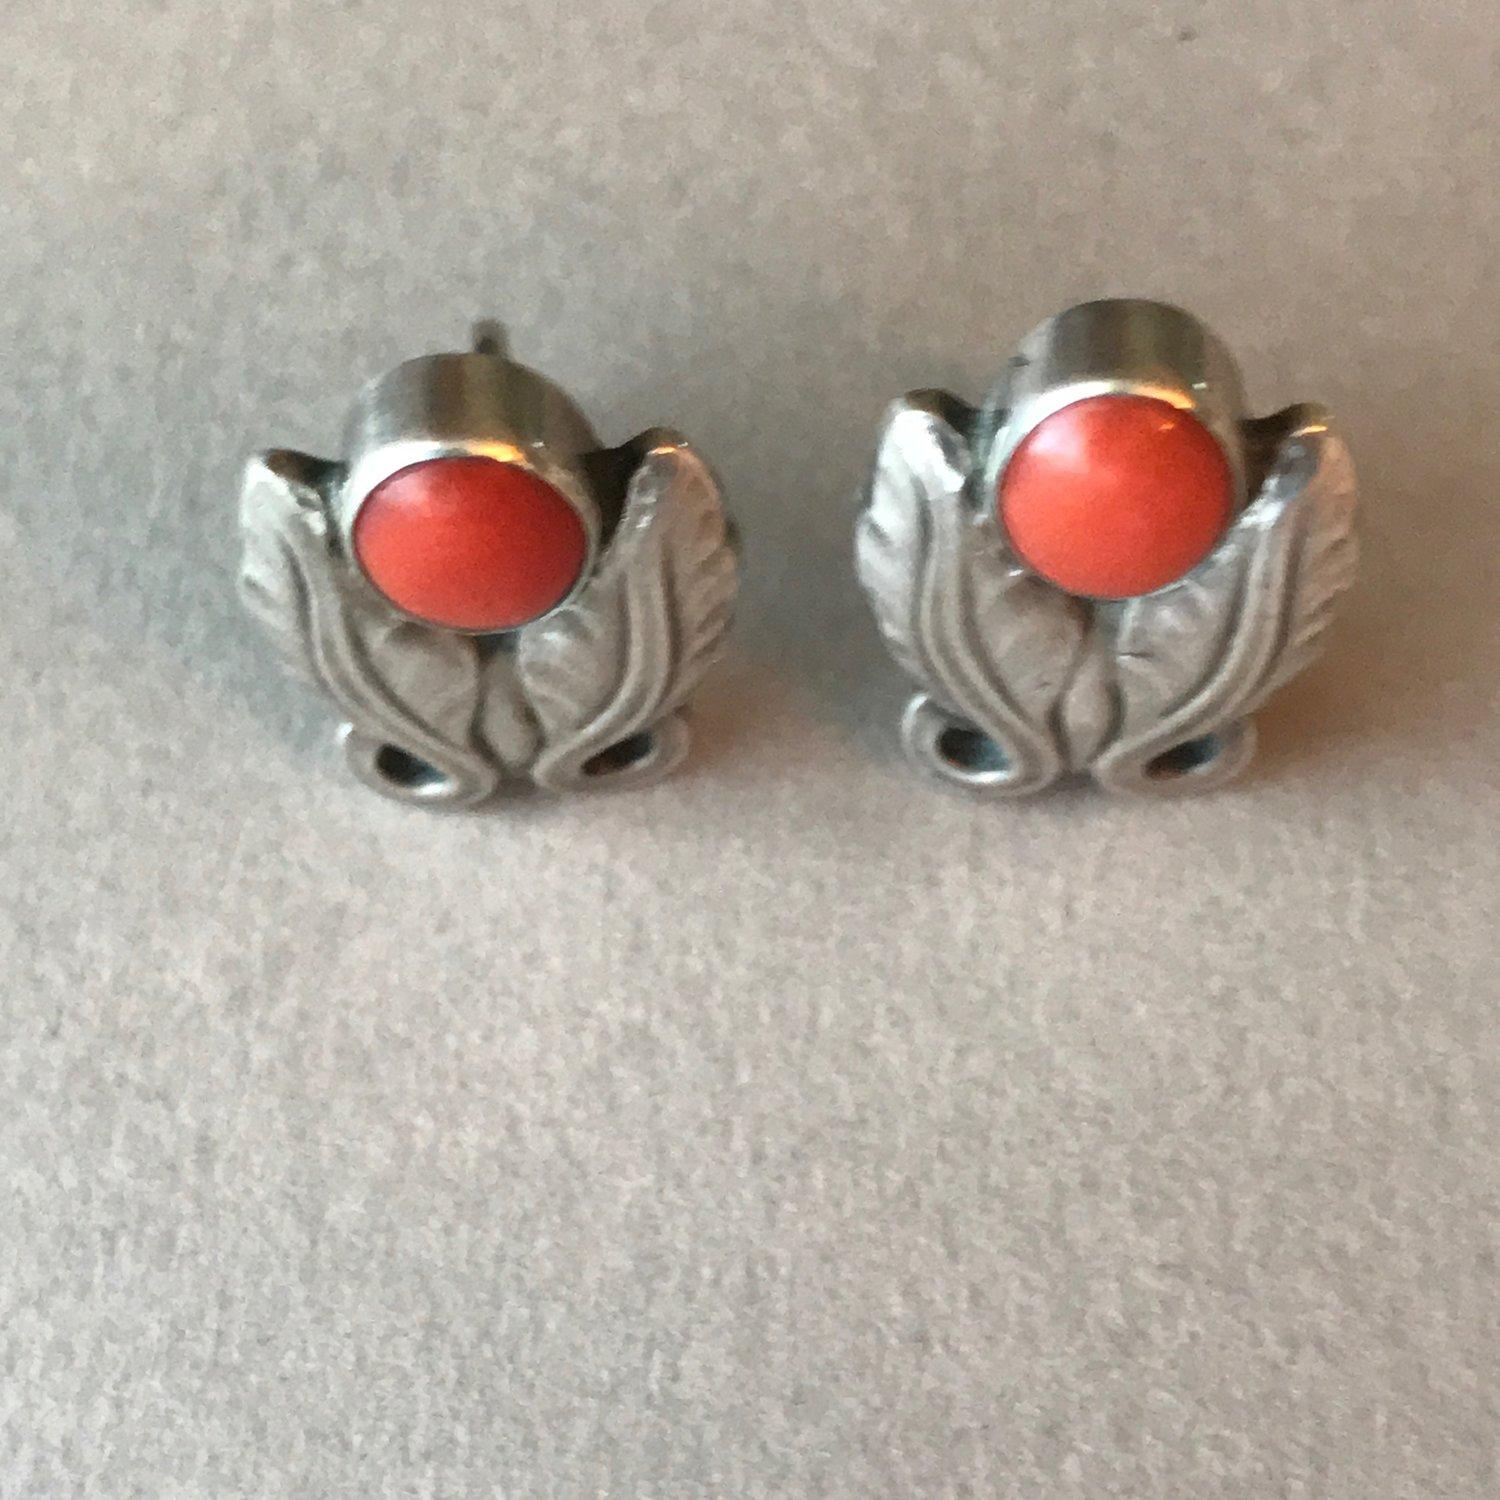 Georg Jensen Sterling Silver Foliate Earrings No. 108 with Coral

These are in excellent condition with original patina.



Designer: Georg Jensen
Maker: Georg Jensen
Design #: 108
Circa: Post 1945
Dimensions: .63